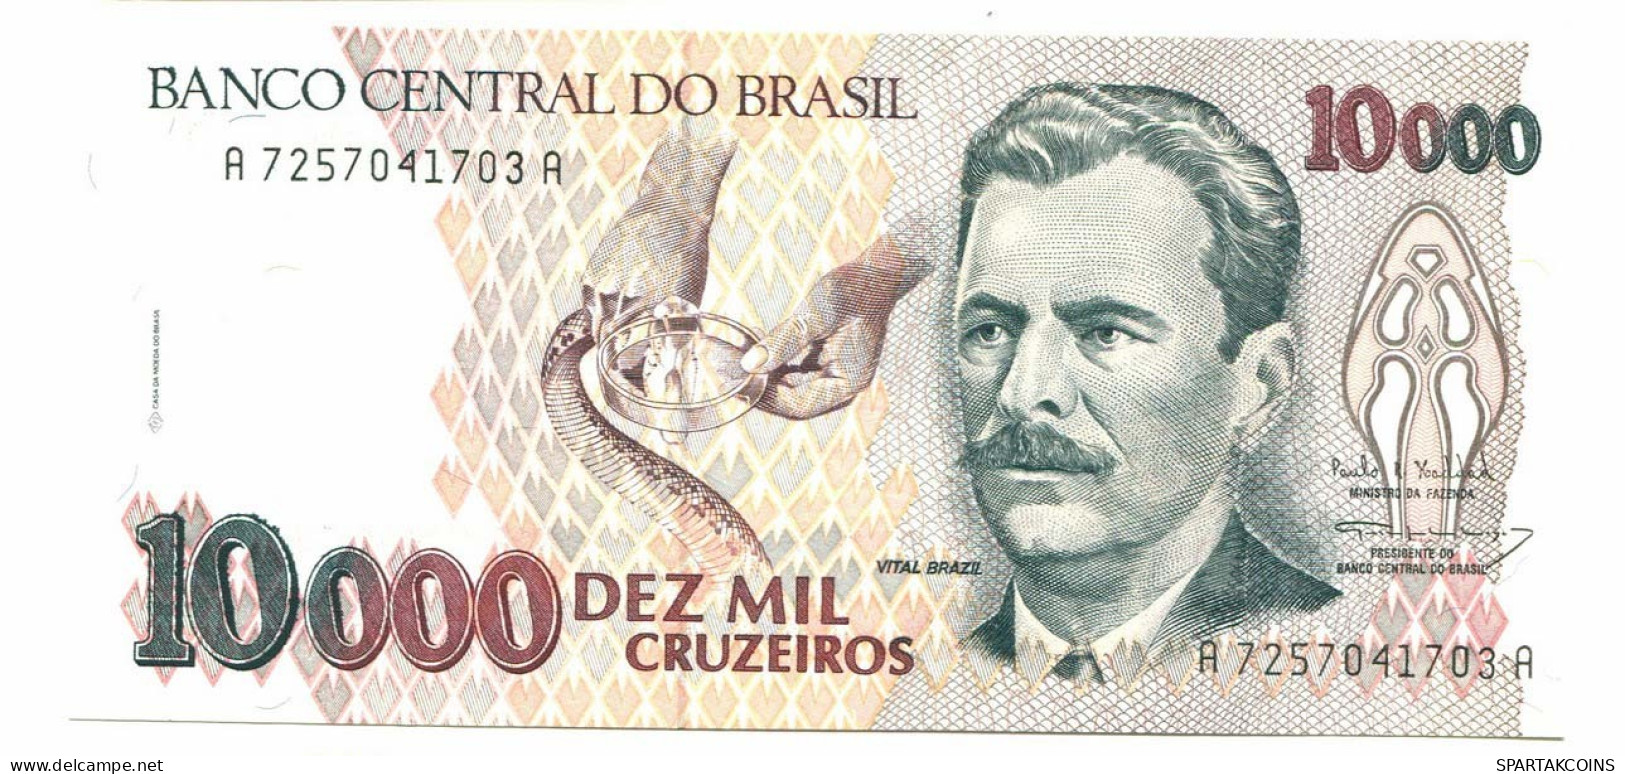 BRASIL 10000 CRUZEIROS 1993 UNC Paper Money Banknote #P10887.4 - [11] Local Banknote Issues